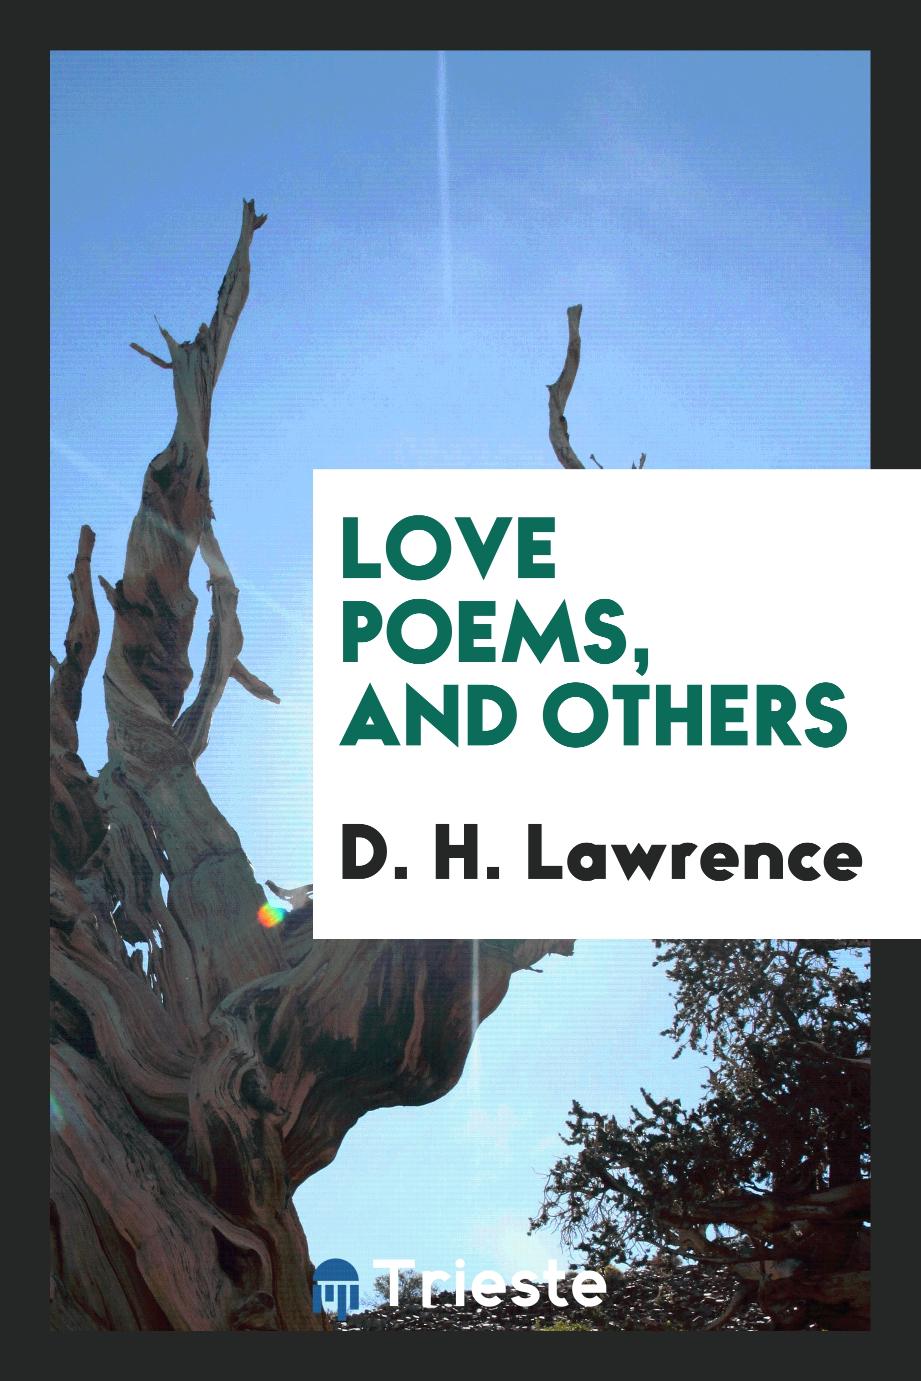 Love poems, and others